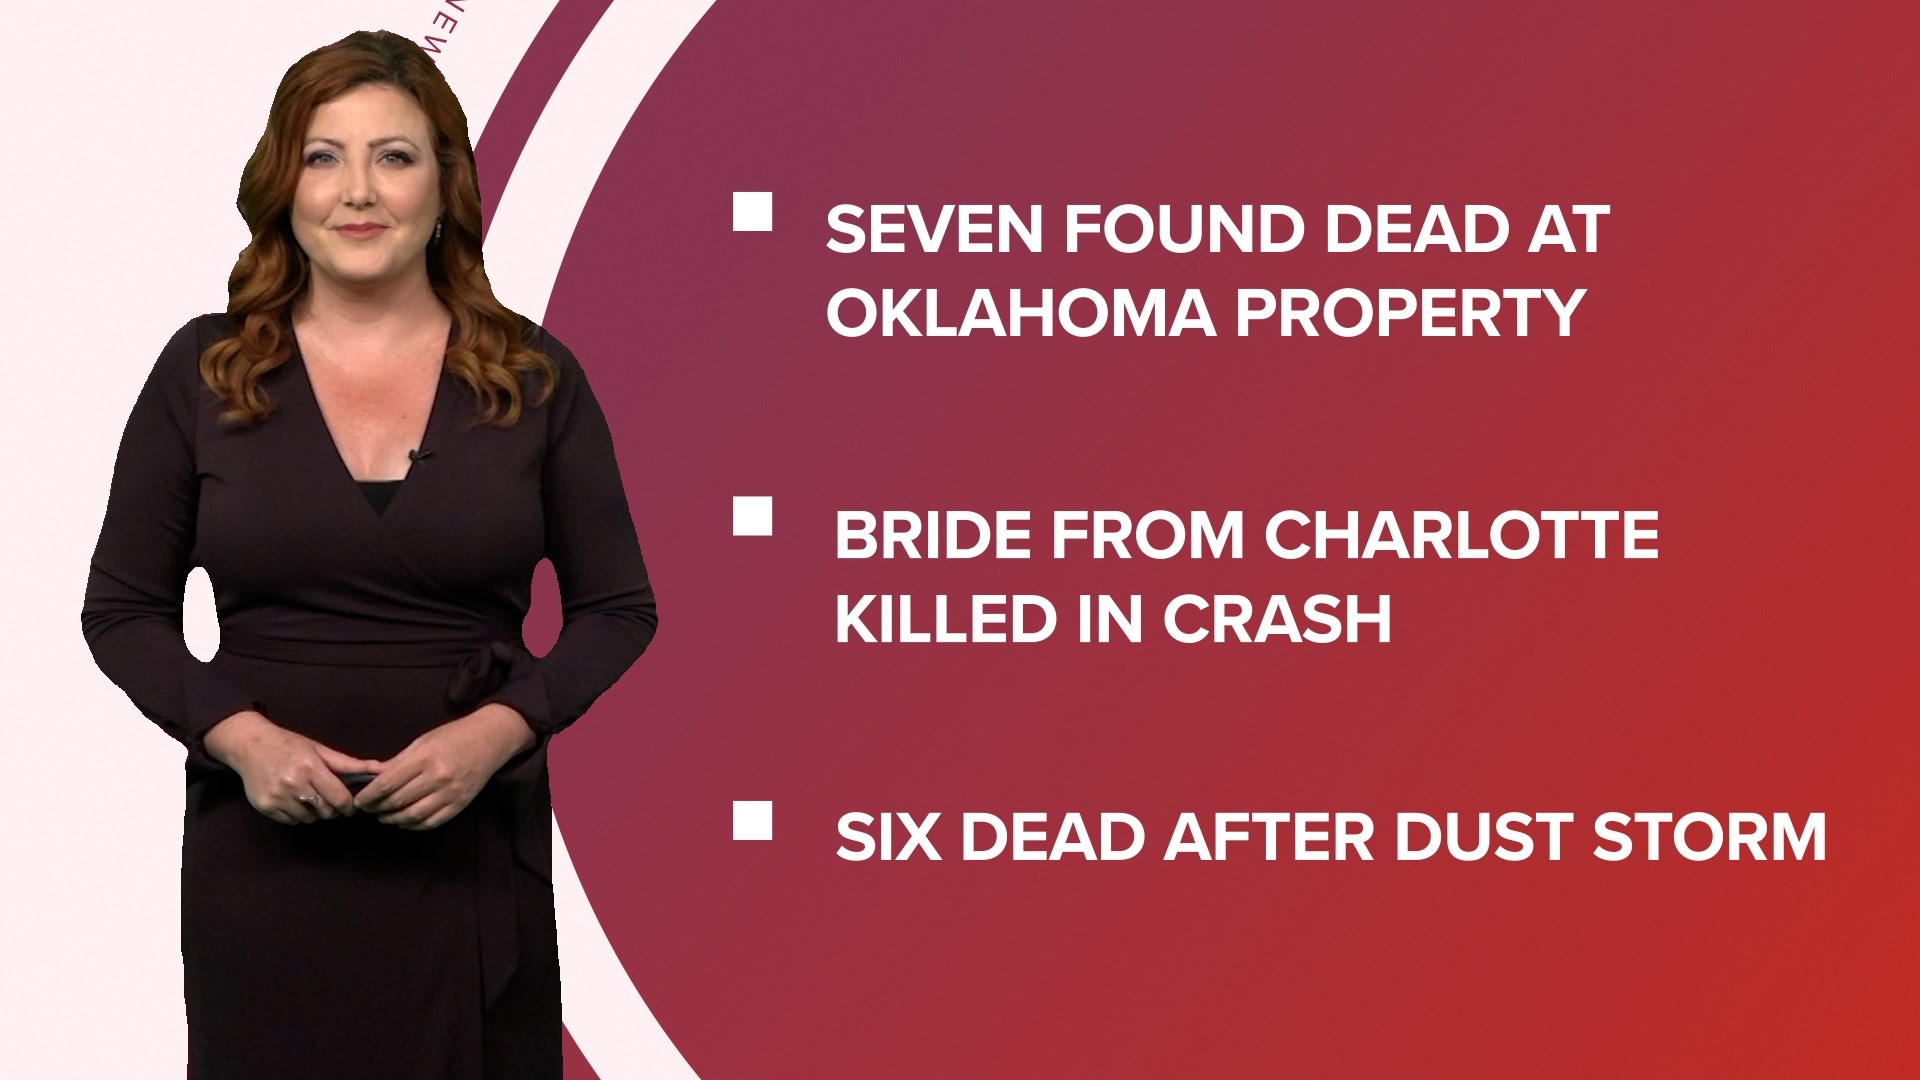 A look at what is happening in the news from a deadly dust storm causing car crashes in Illinois to bodies found in Oklahoma and moments from the Met Gala.